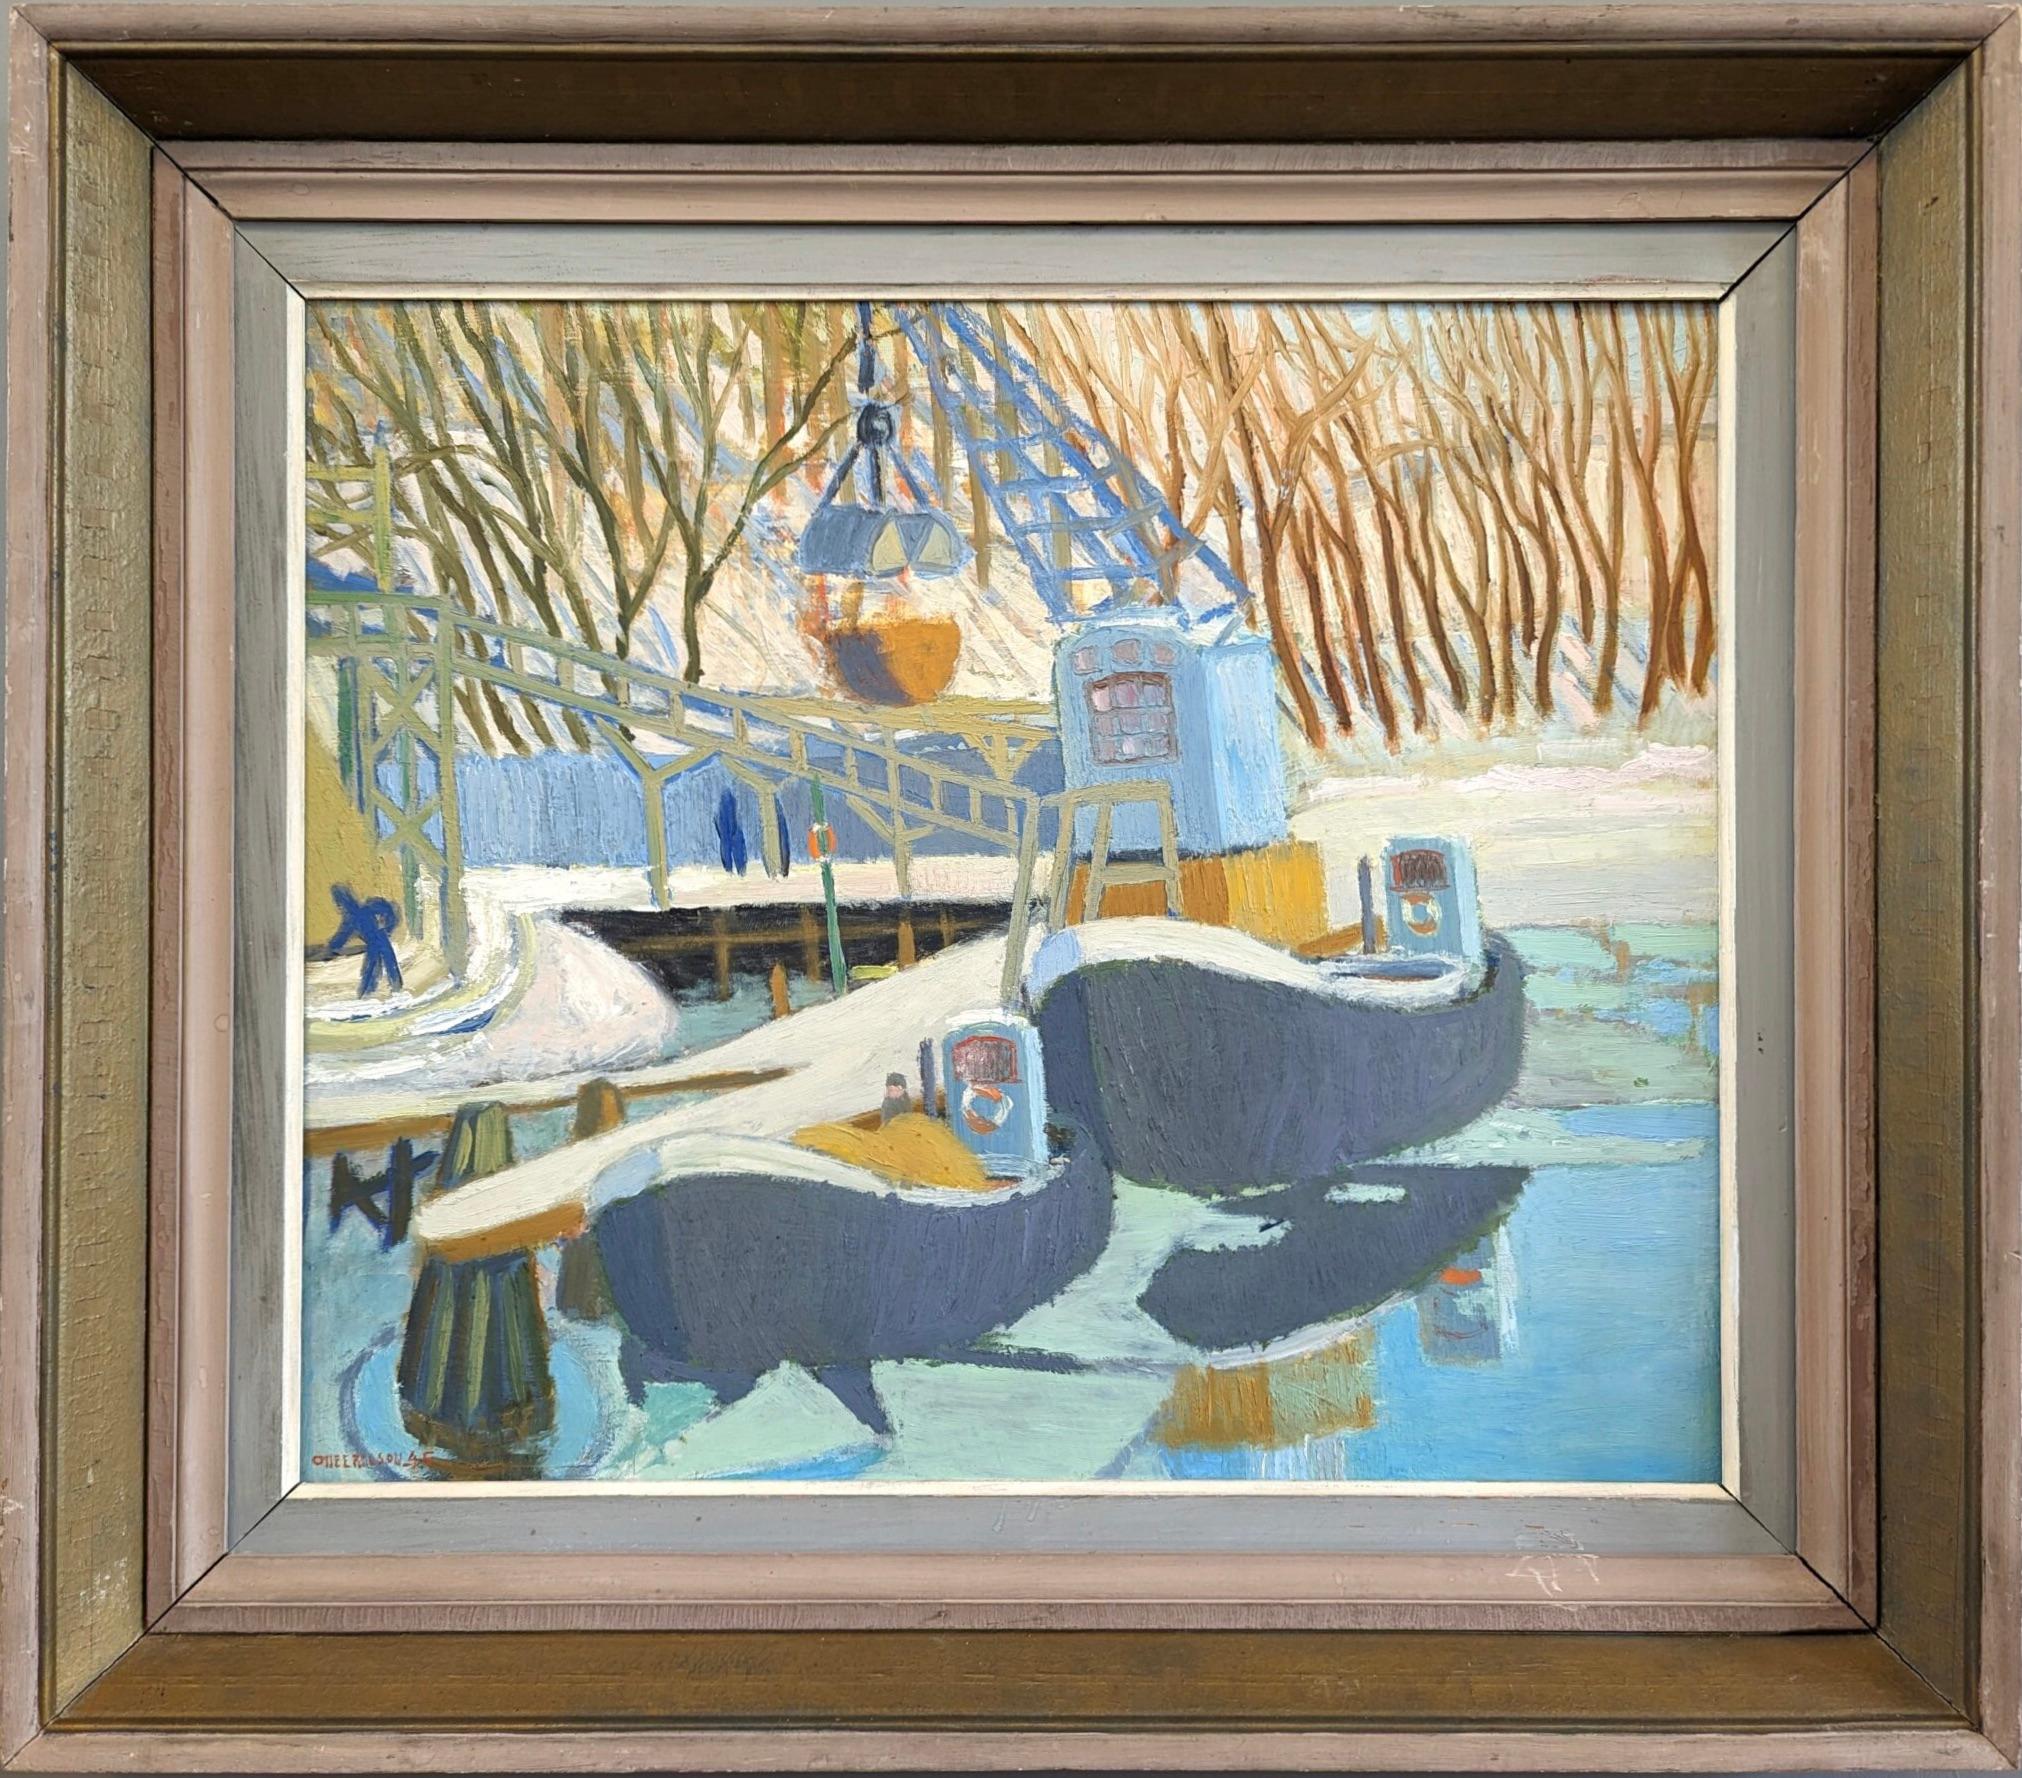 Unknown Landscape Painting - 1945 Vintage Mid-Century Modern Seascape Framed Oil Painting - Quay Cranes